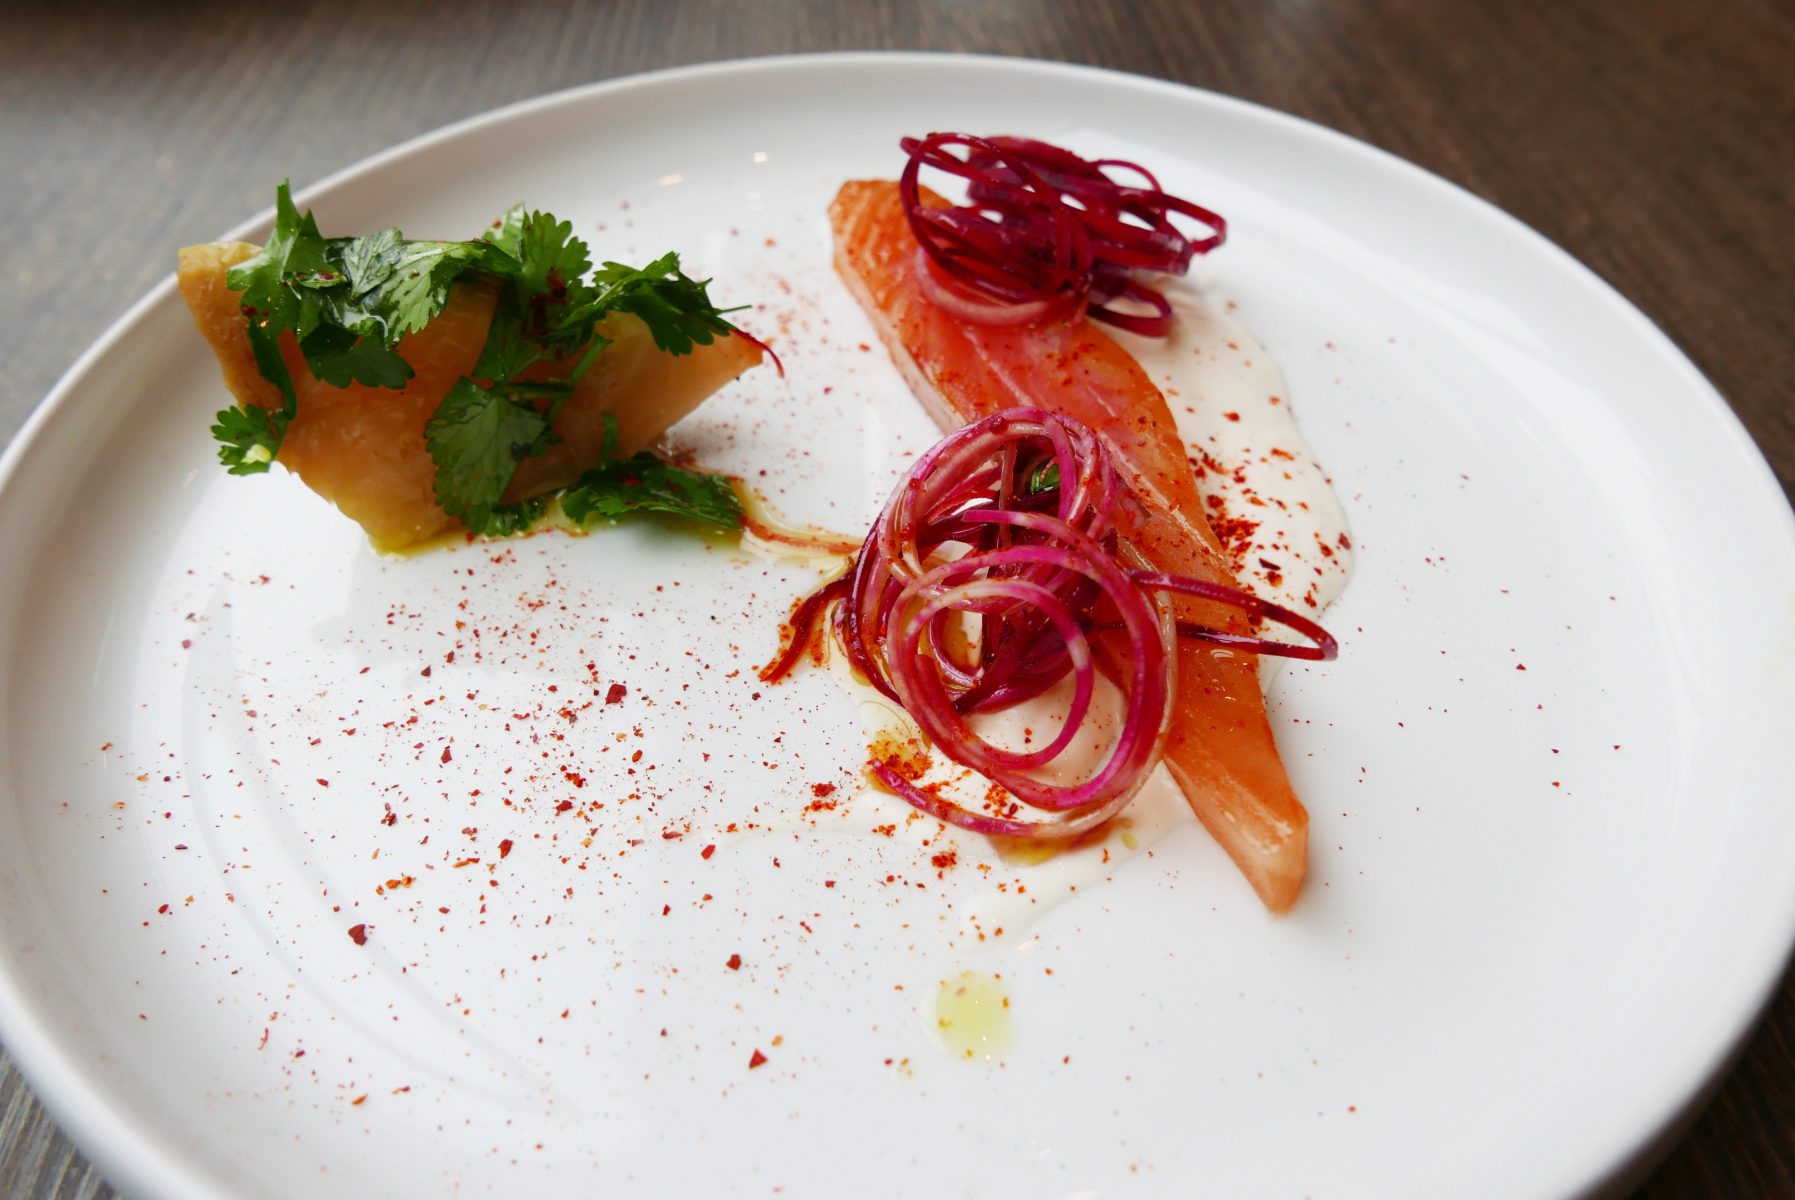 Home smoked salmon with beetroot